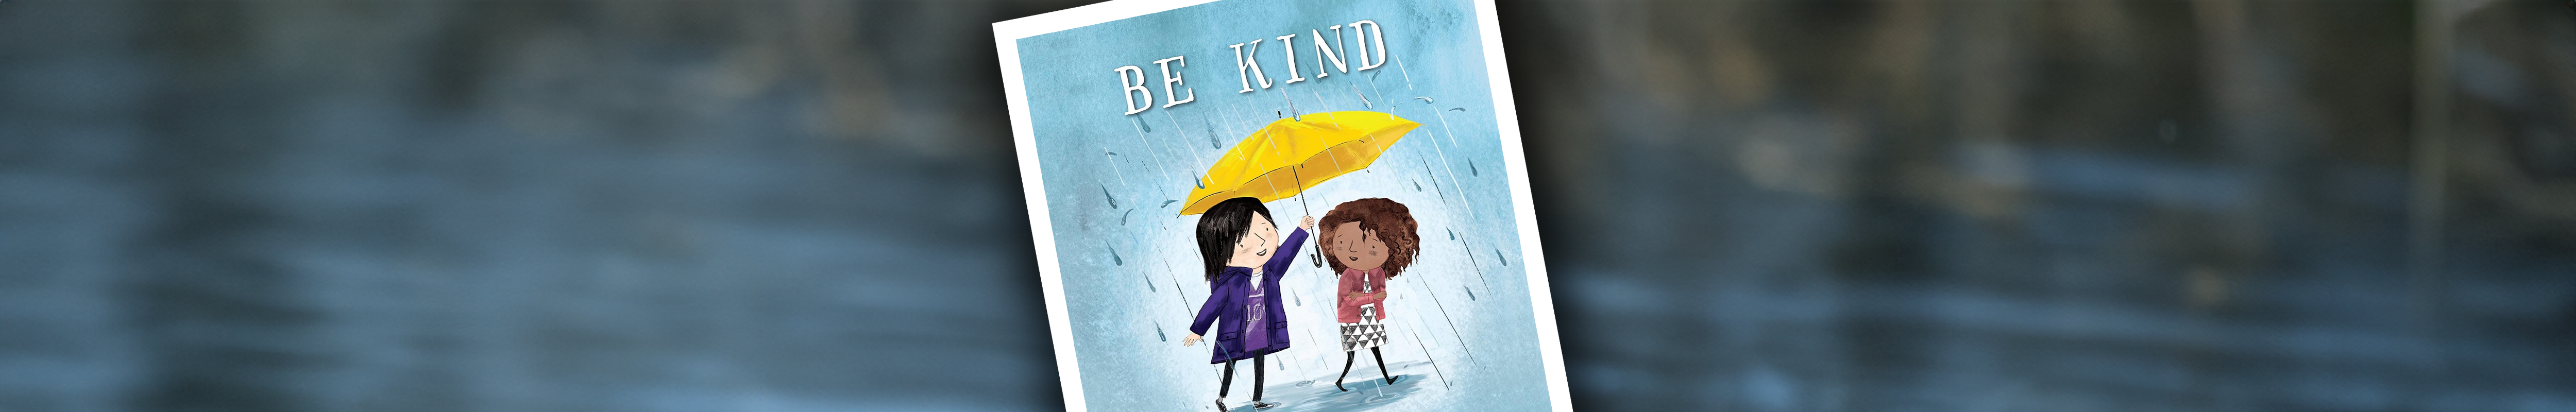 Be Kind featured 1920x500